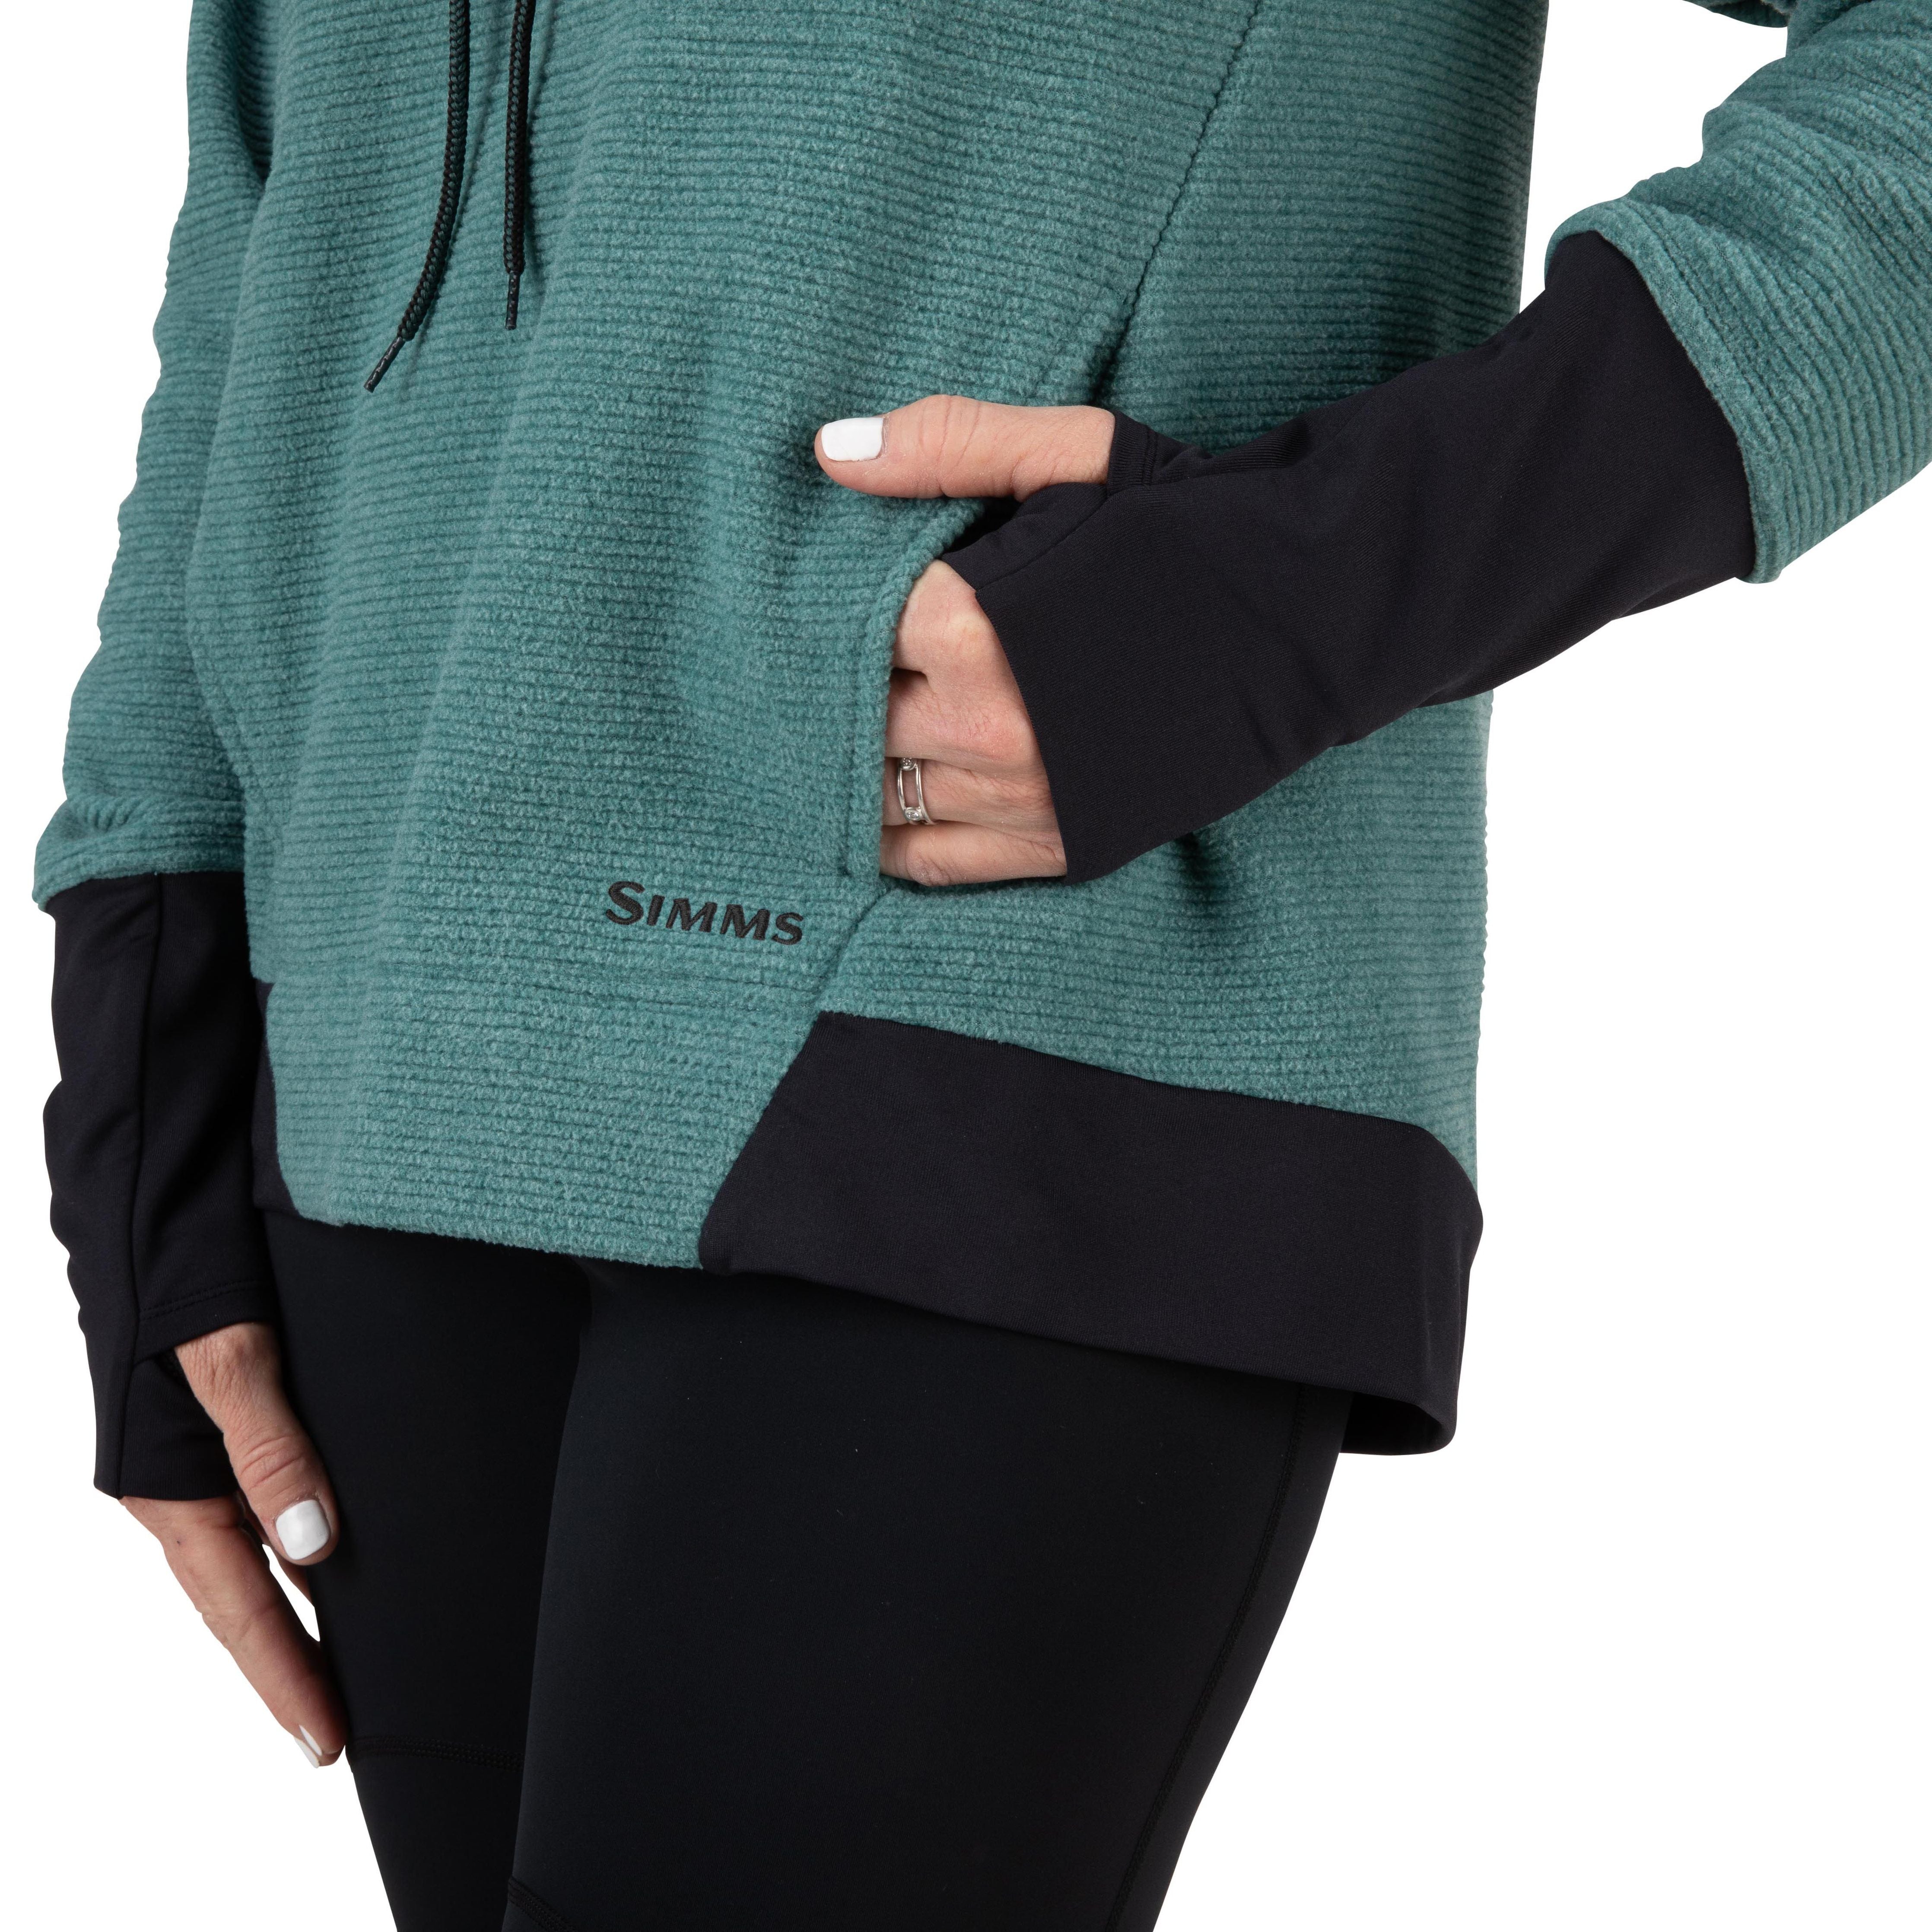 Simms Women's Rivershed Sweater Avalon Teal Image 10